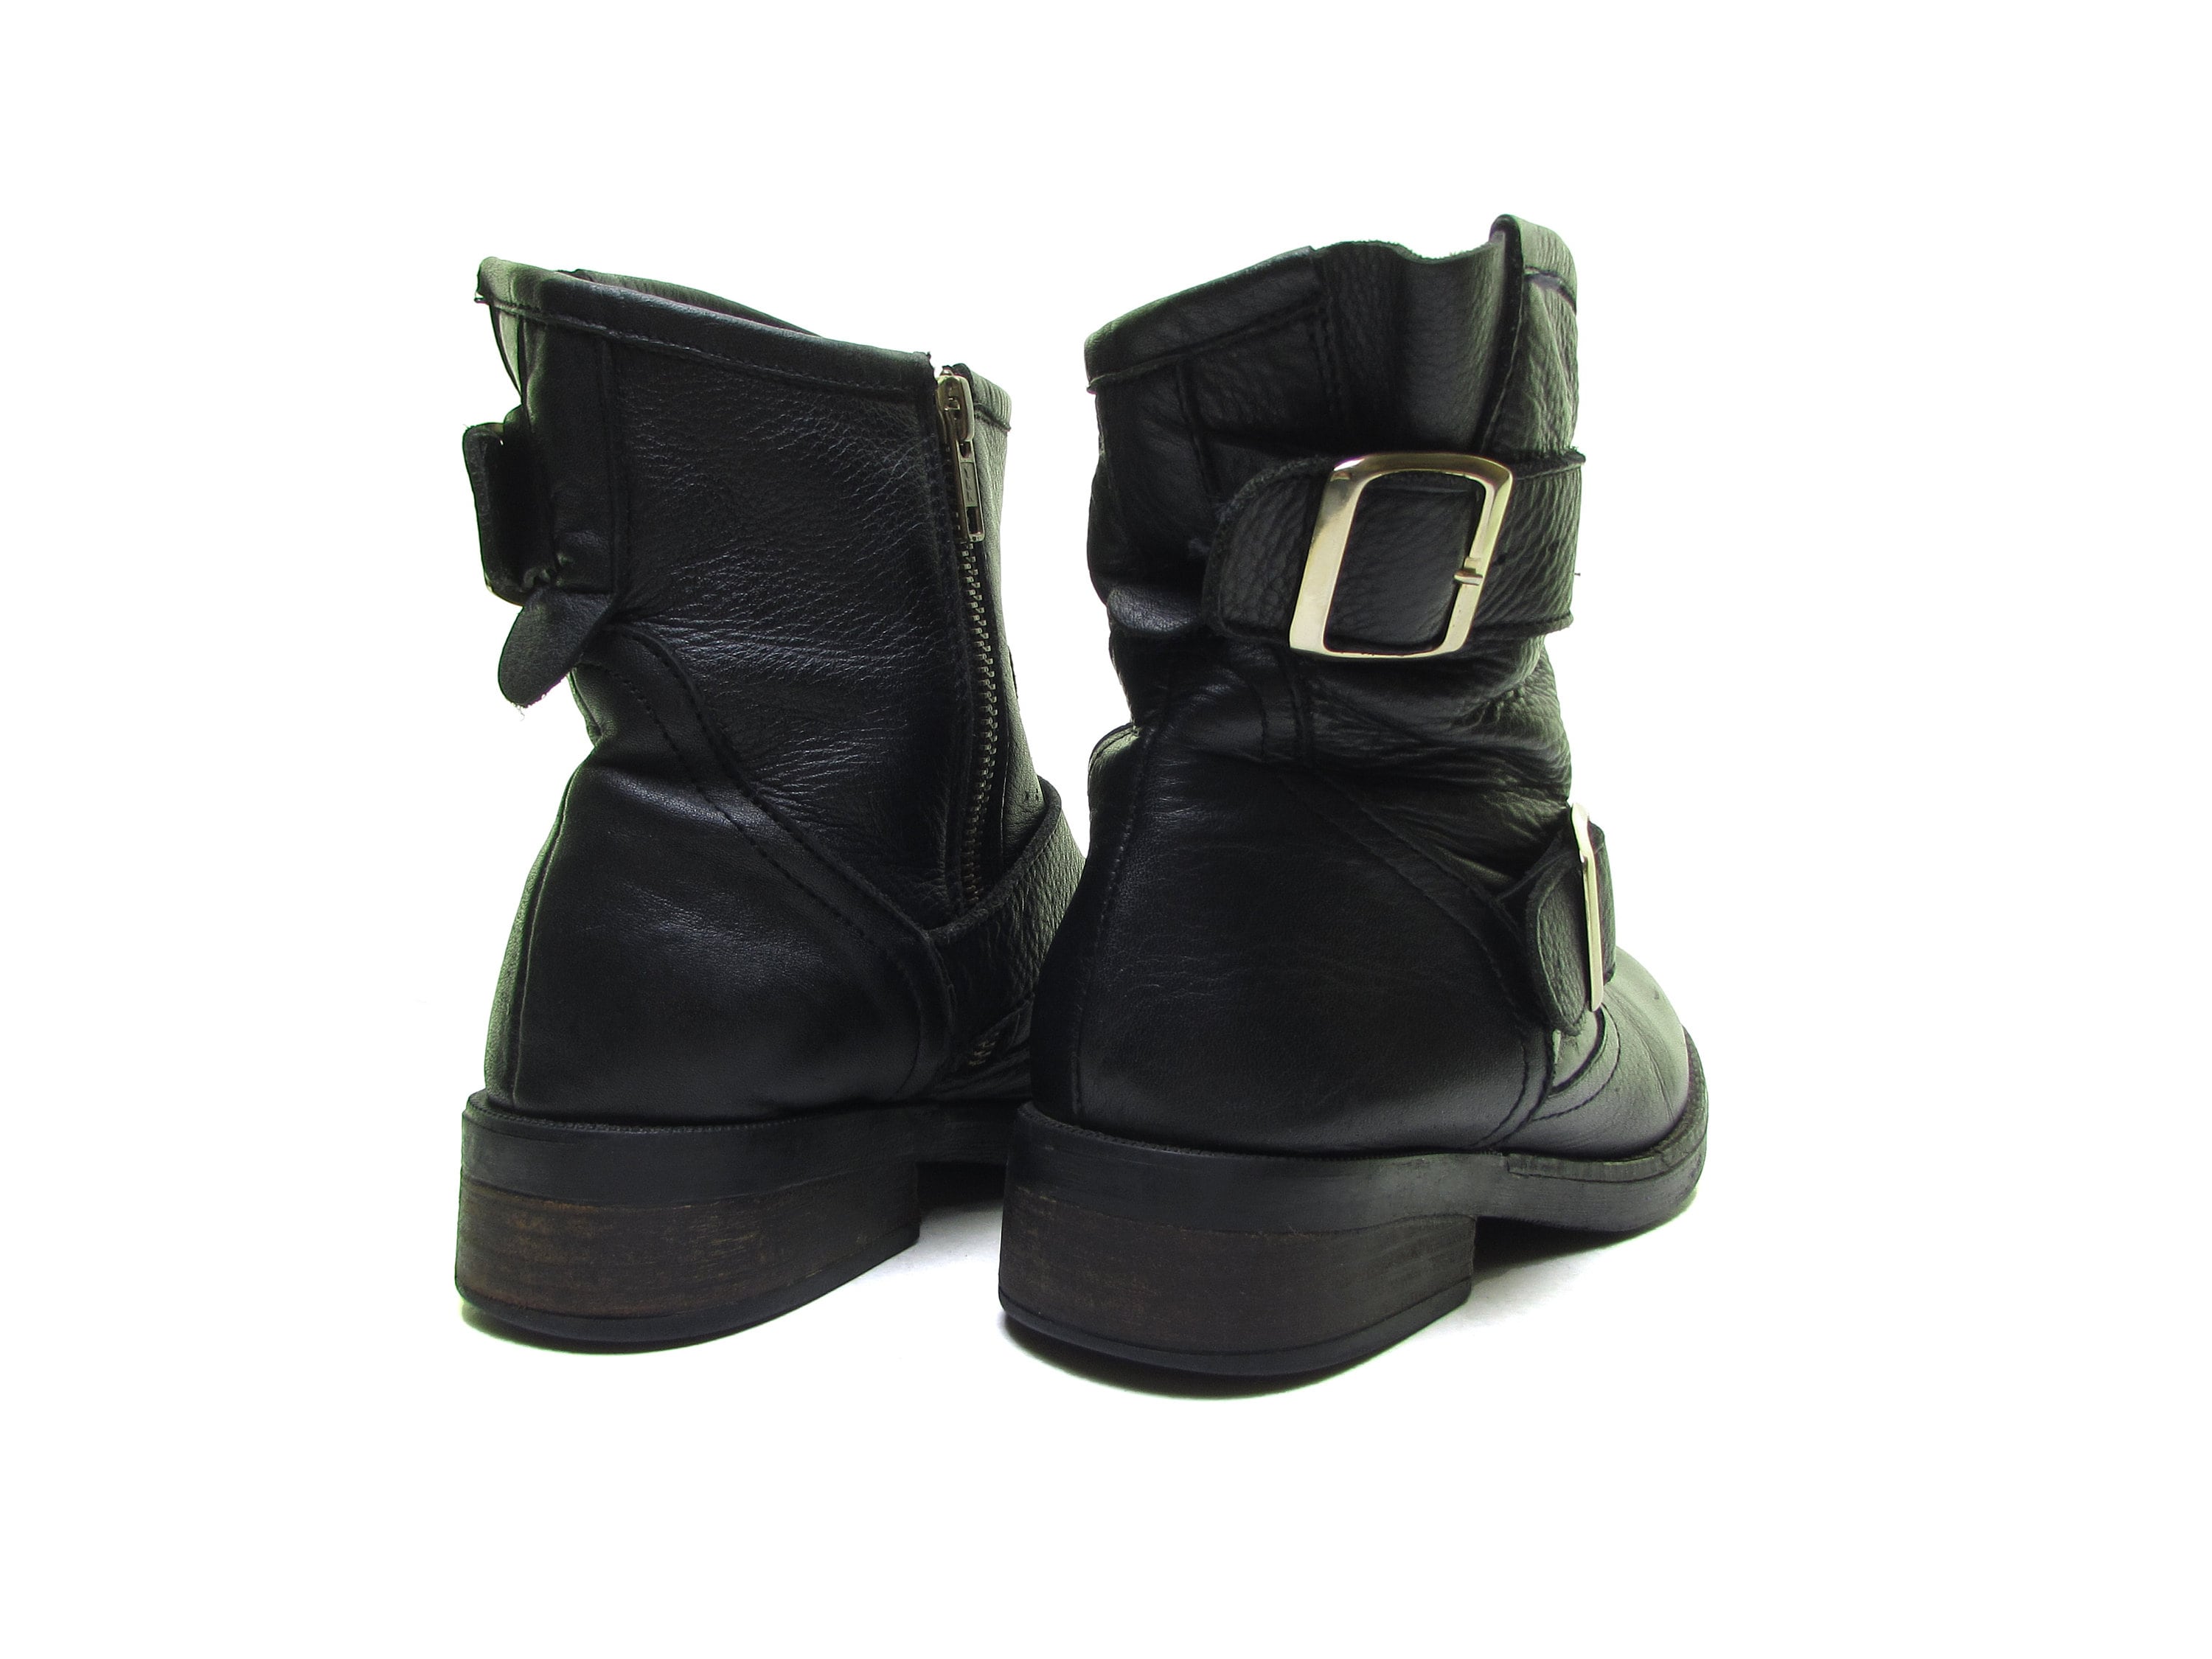 STEVE MADDEN Boots Black Leather Motorcycle Boots Buckle -